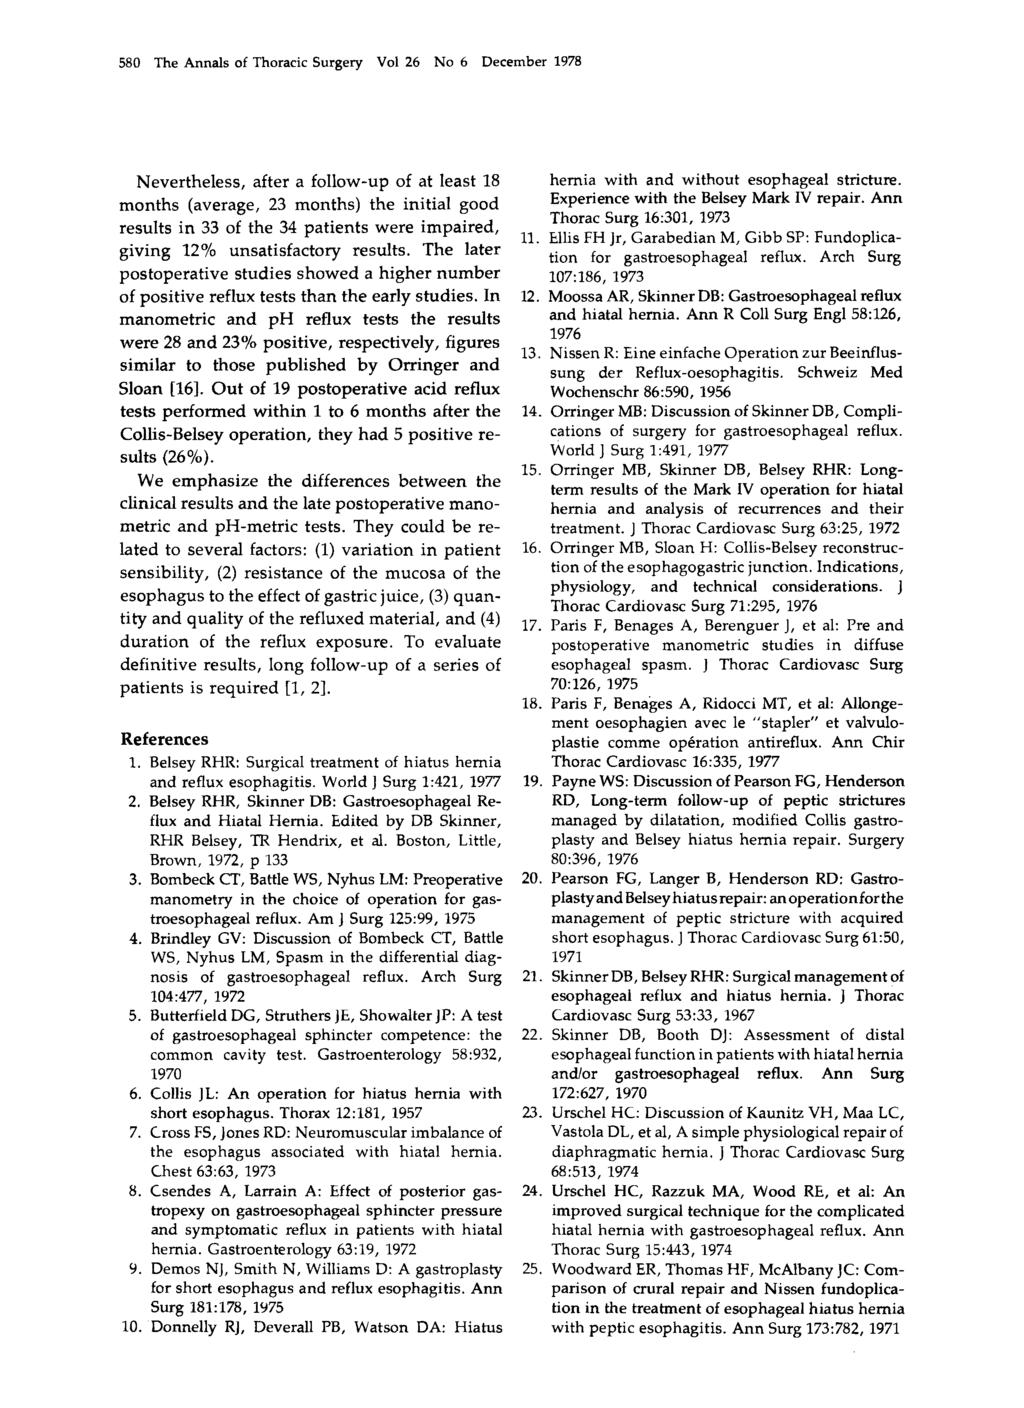 580 The Annals of Thoracic Surgery Vol 26 No 6 December 1978 Nevertheless, after a follow-up of at least 18 months (average, 23 months) the initial good results in 33 of the 34 patients were